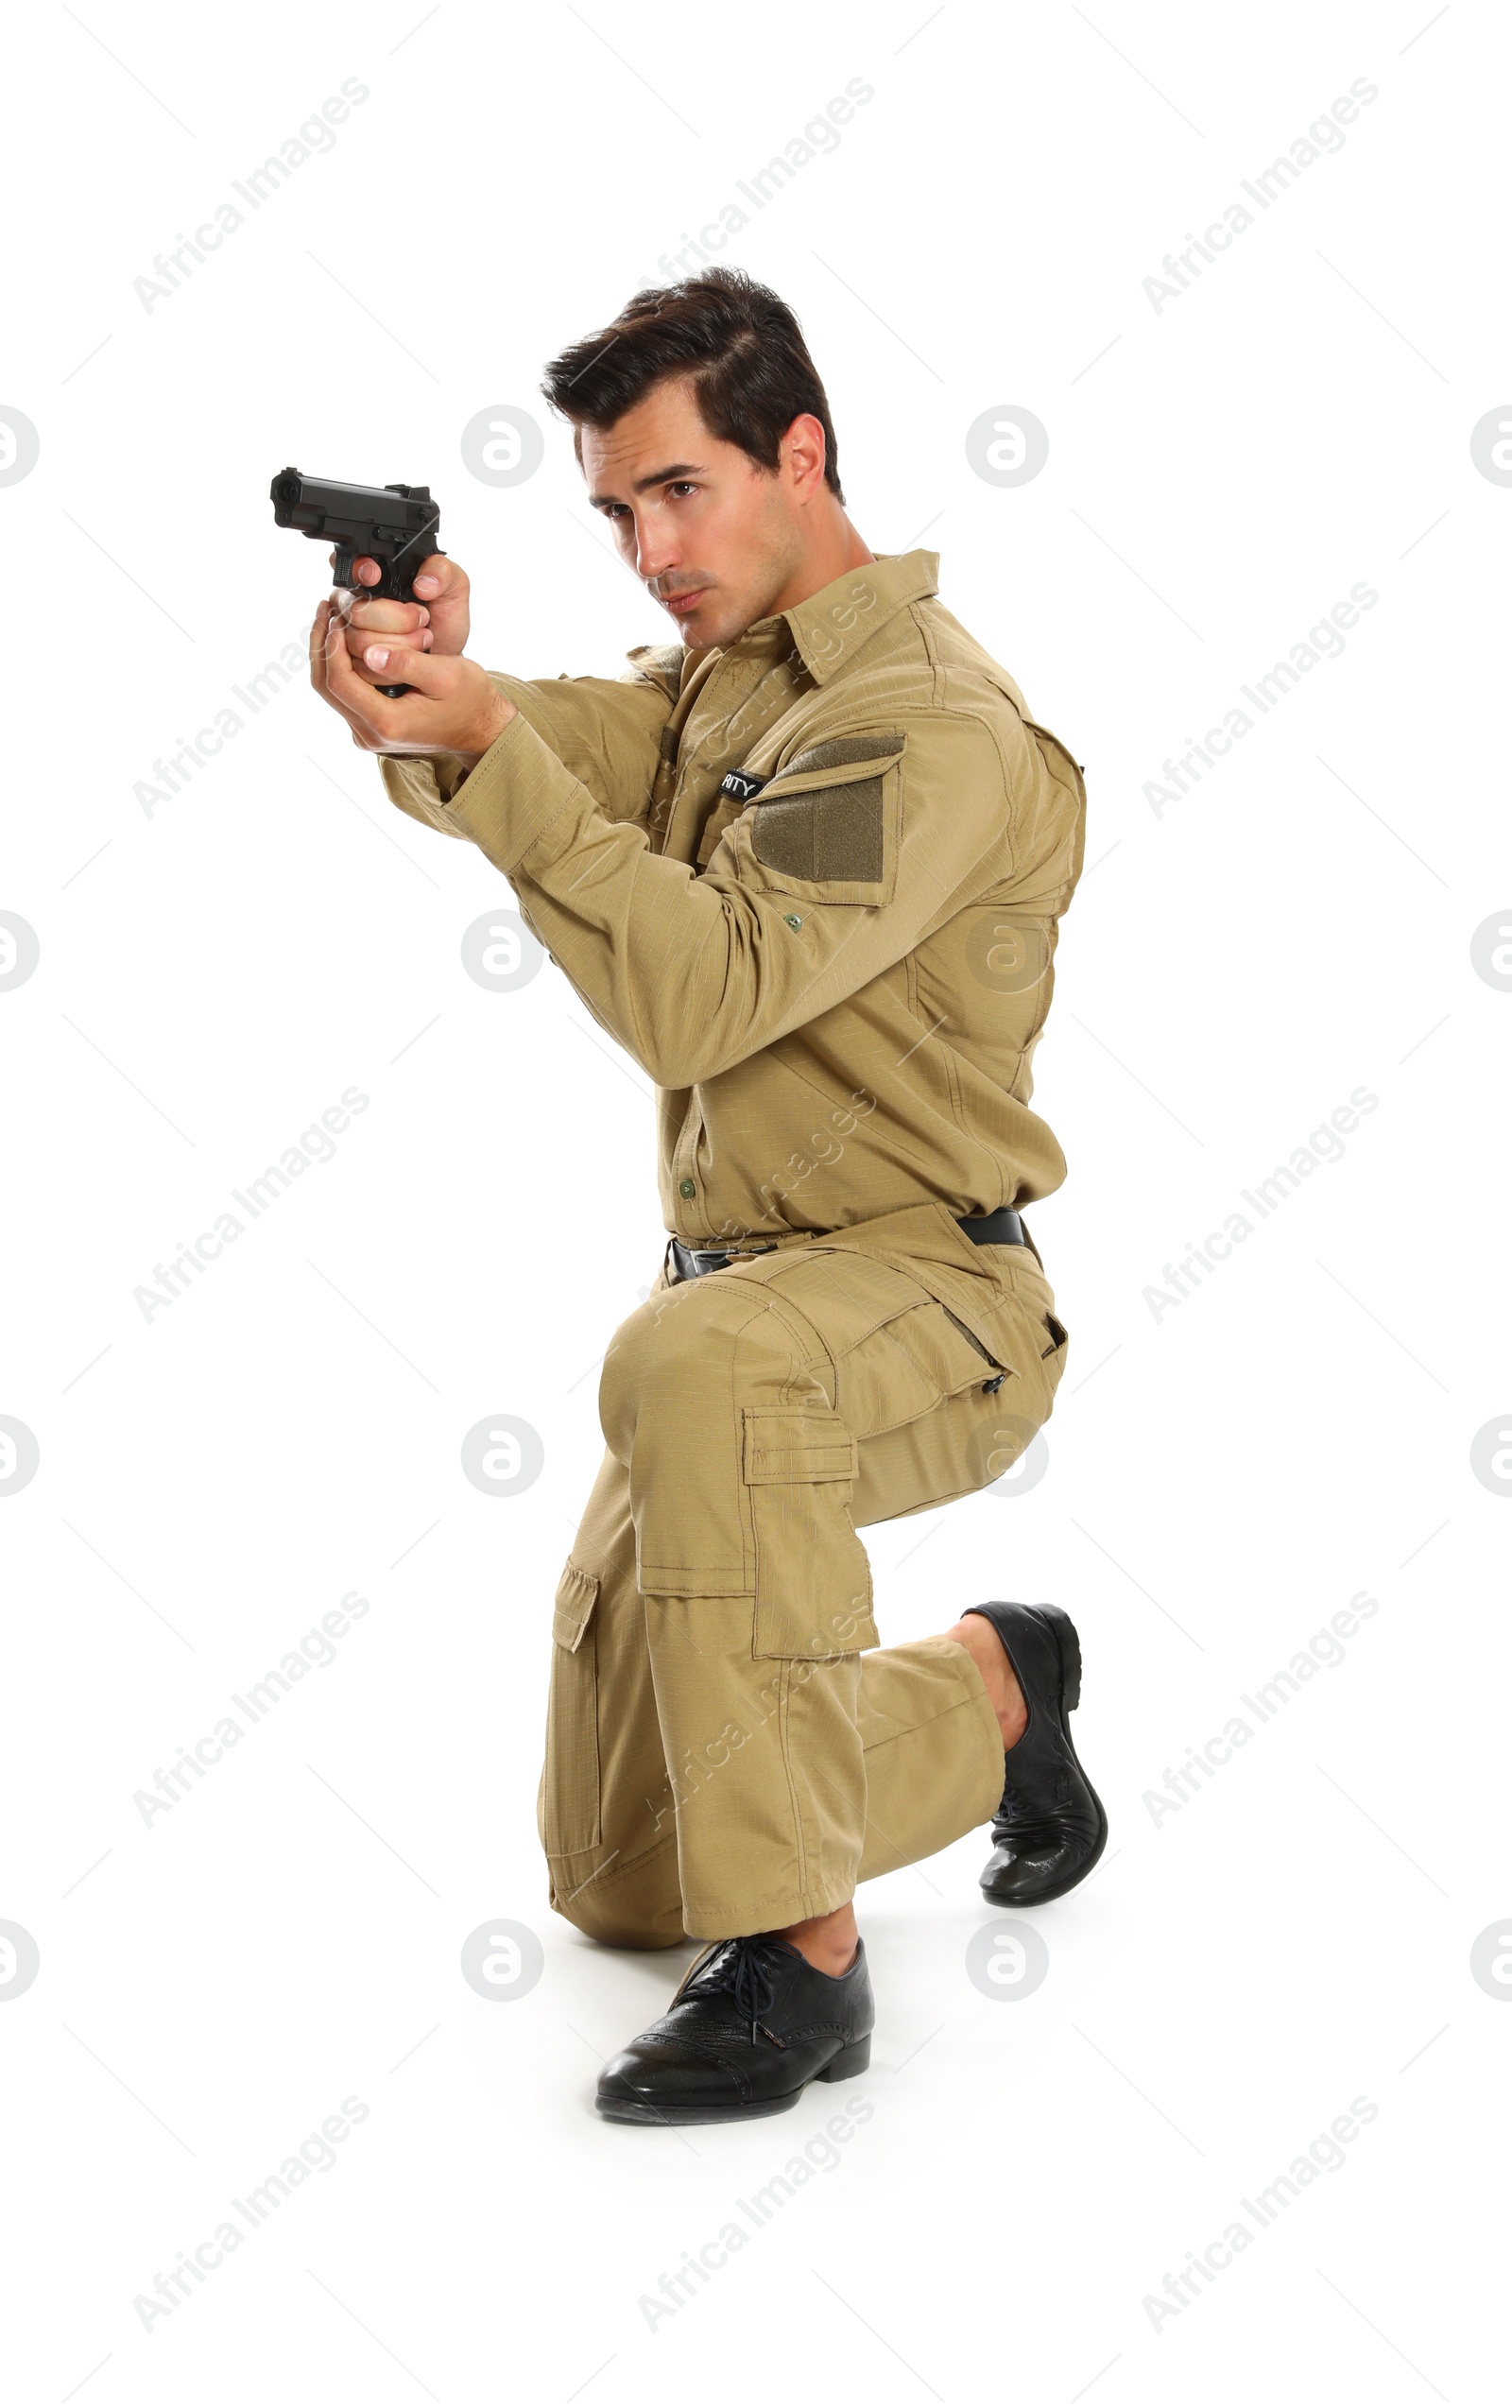 Photo of Male security guard in uniform with gun on white background